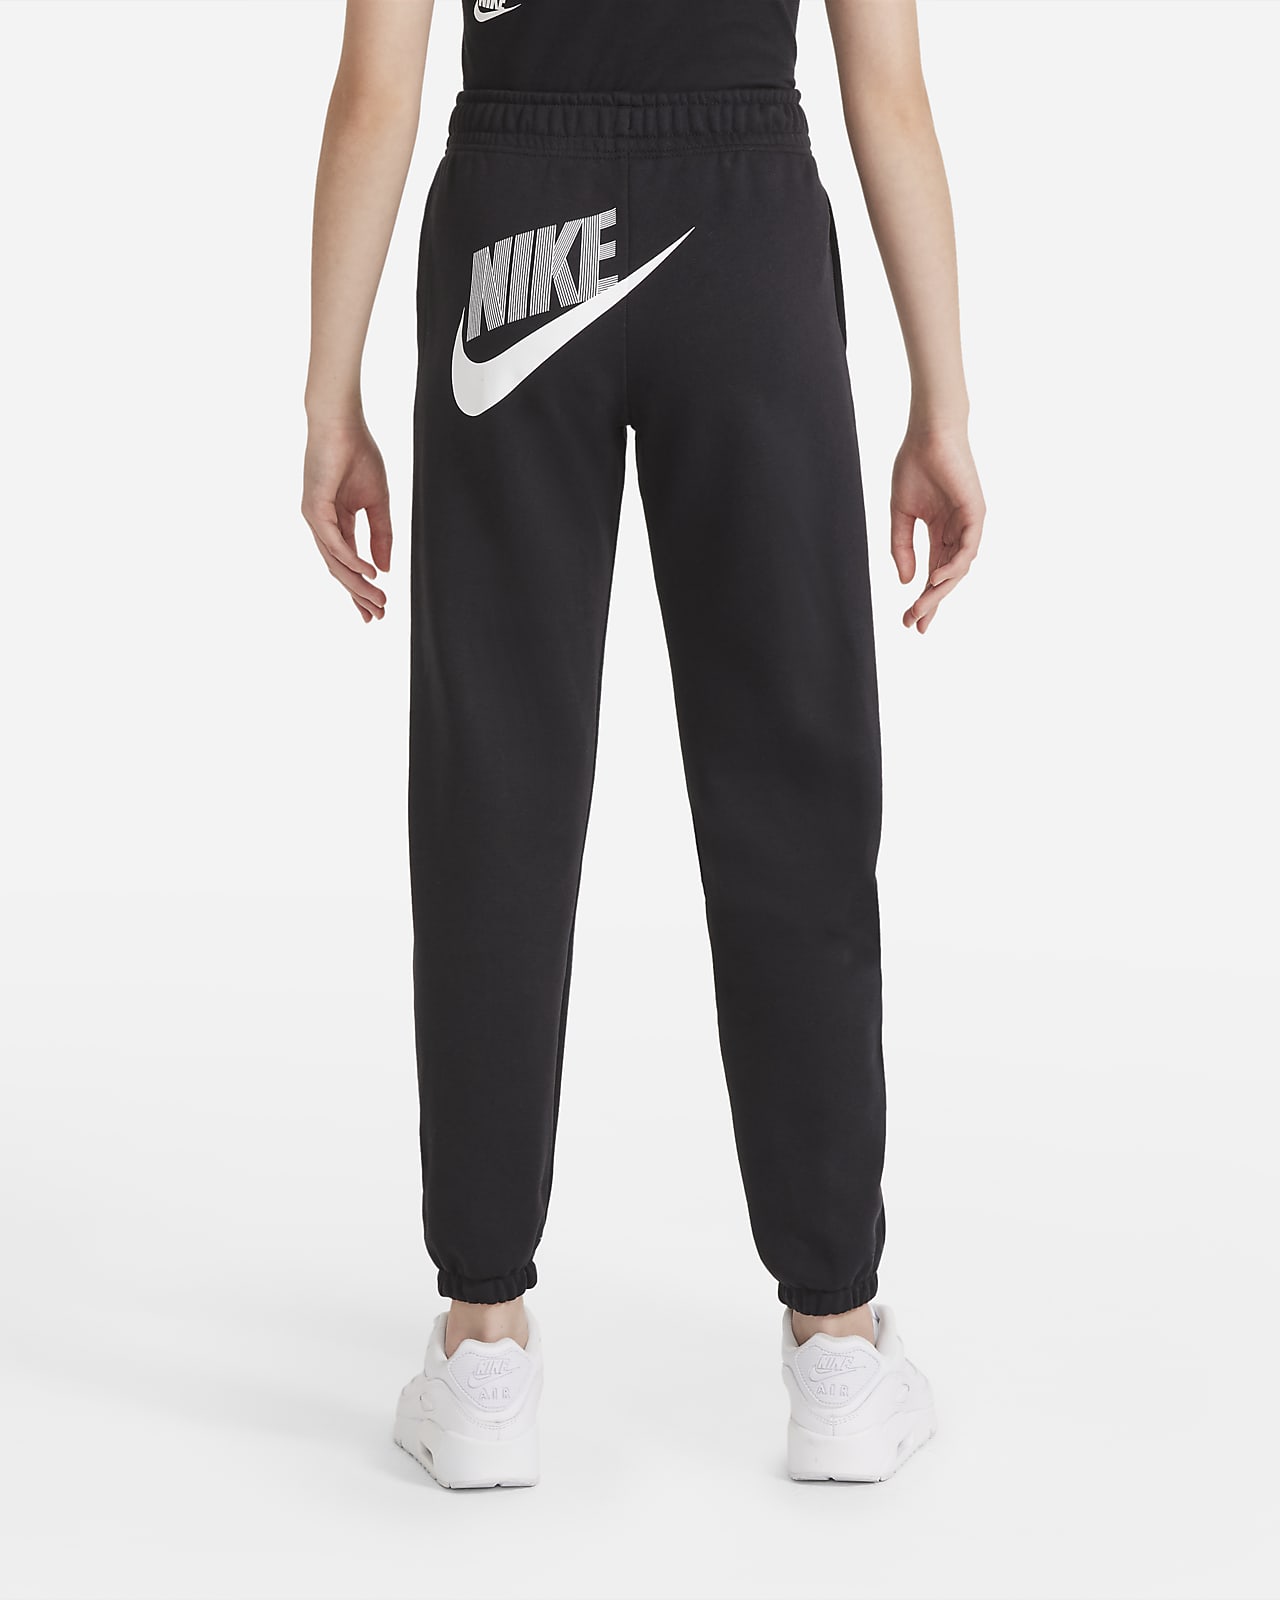 https://static.nike.com/a/images/t_PDP_1280_v1/f_auto,q_auto:eco/7e28ea7d-1597-4a00-88f7-95375a319cd2/sportswear-big-kids-girls-french-terry-dance-pants-pXsG0m.png